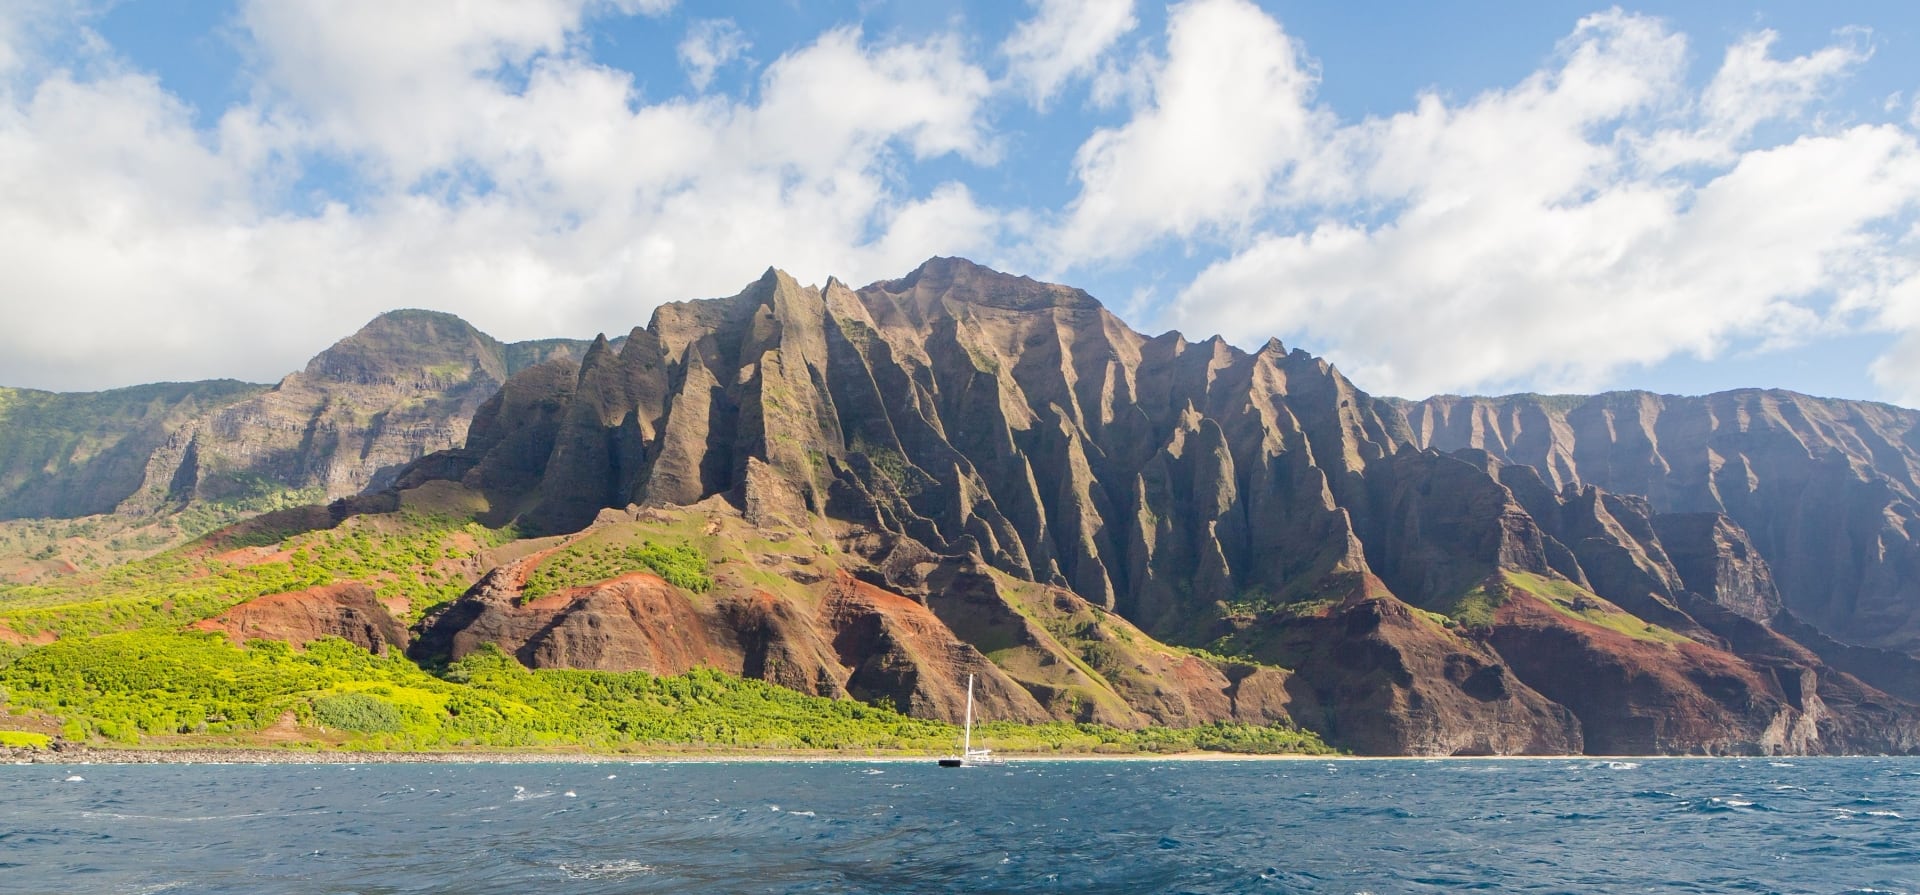 Breathtaking view of the Na Pali Coast with its towering, jagged cliffs, lush greenery, and blue ocean water under a bright sky.